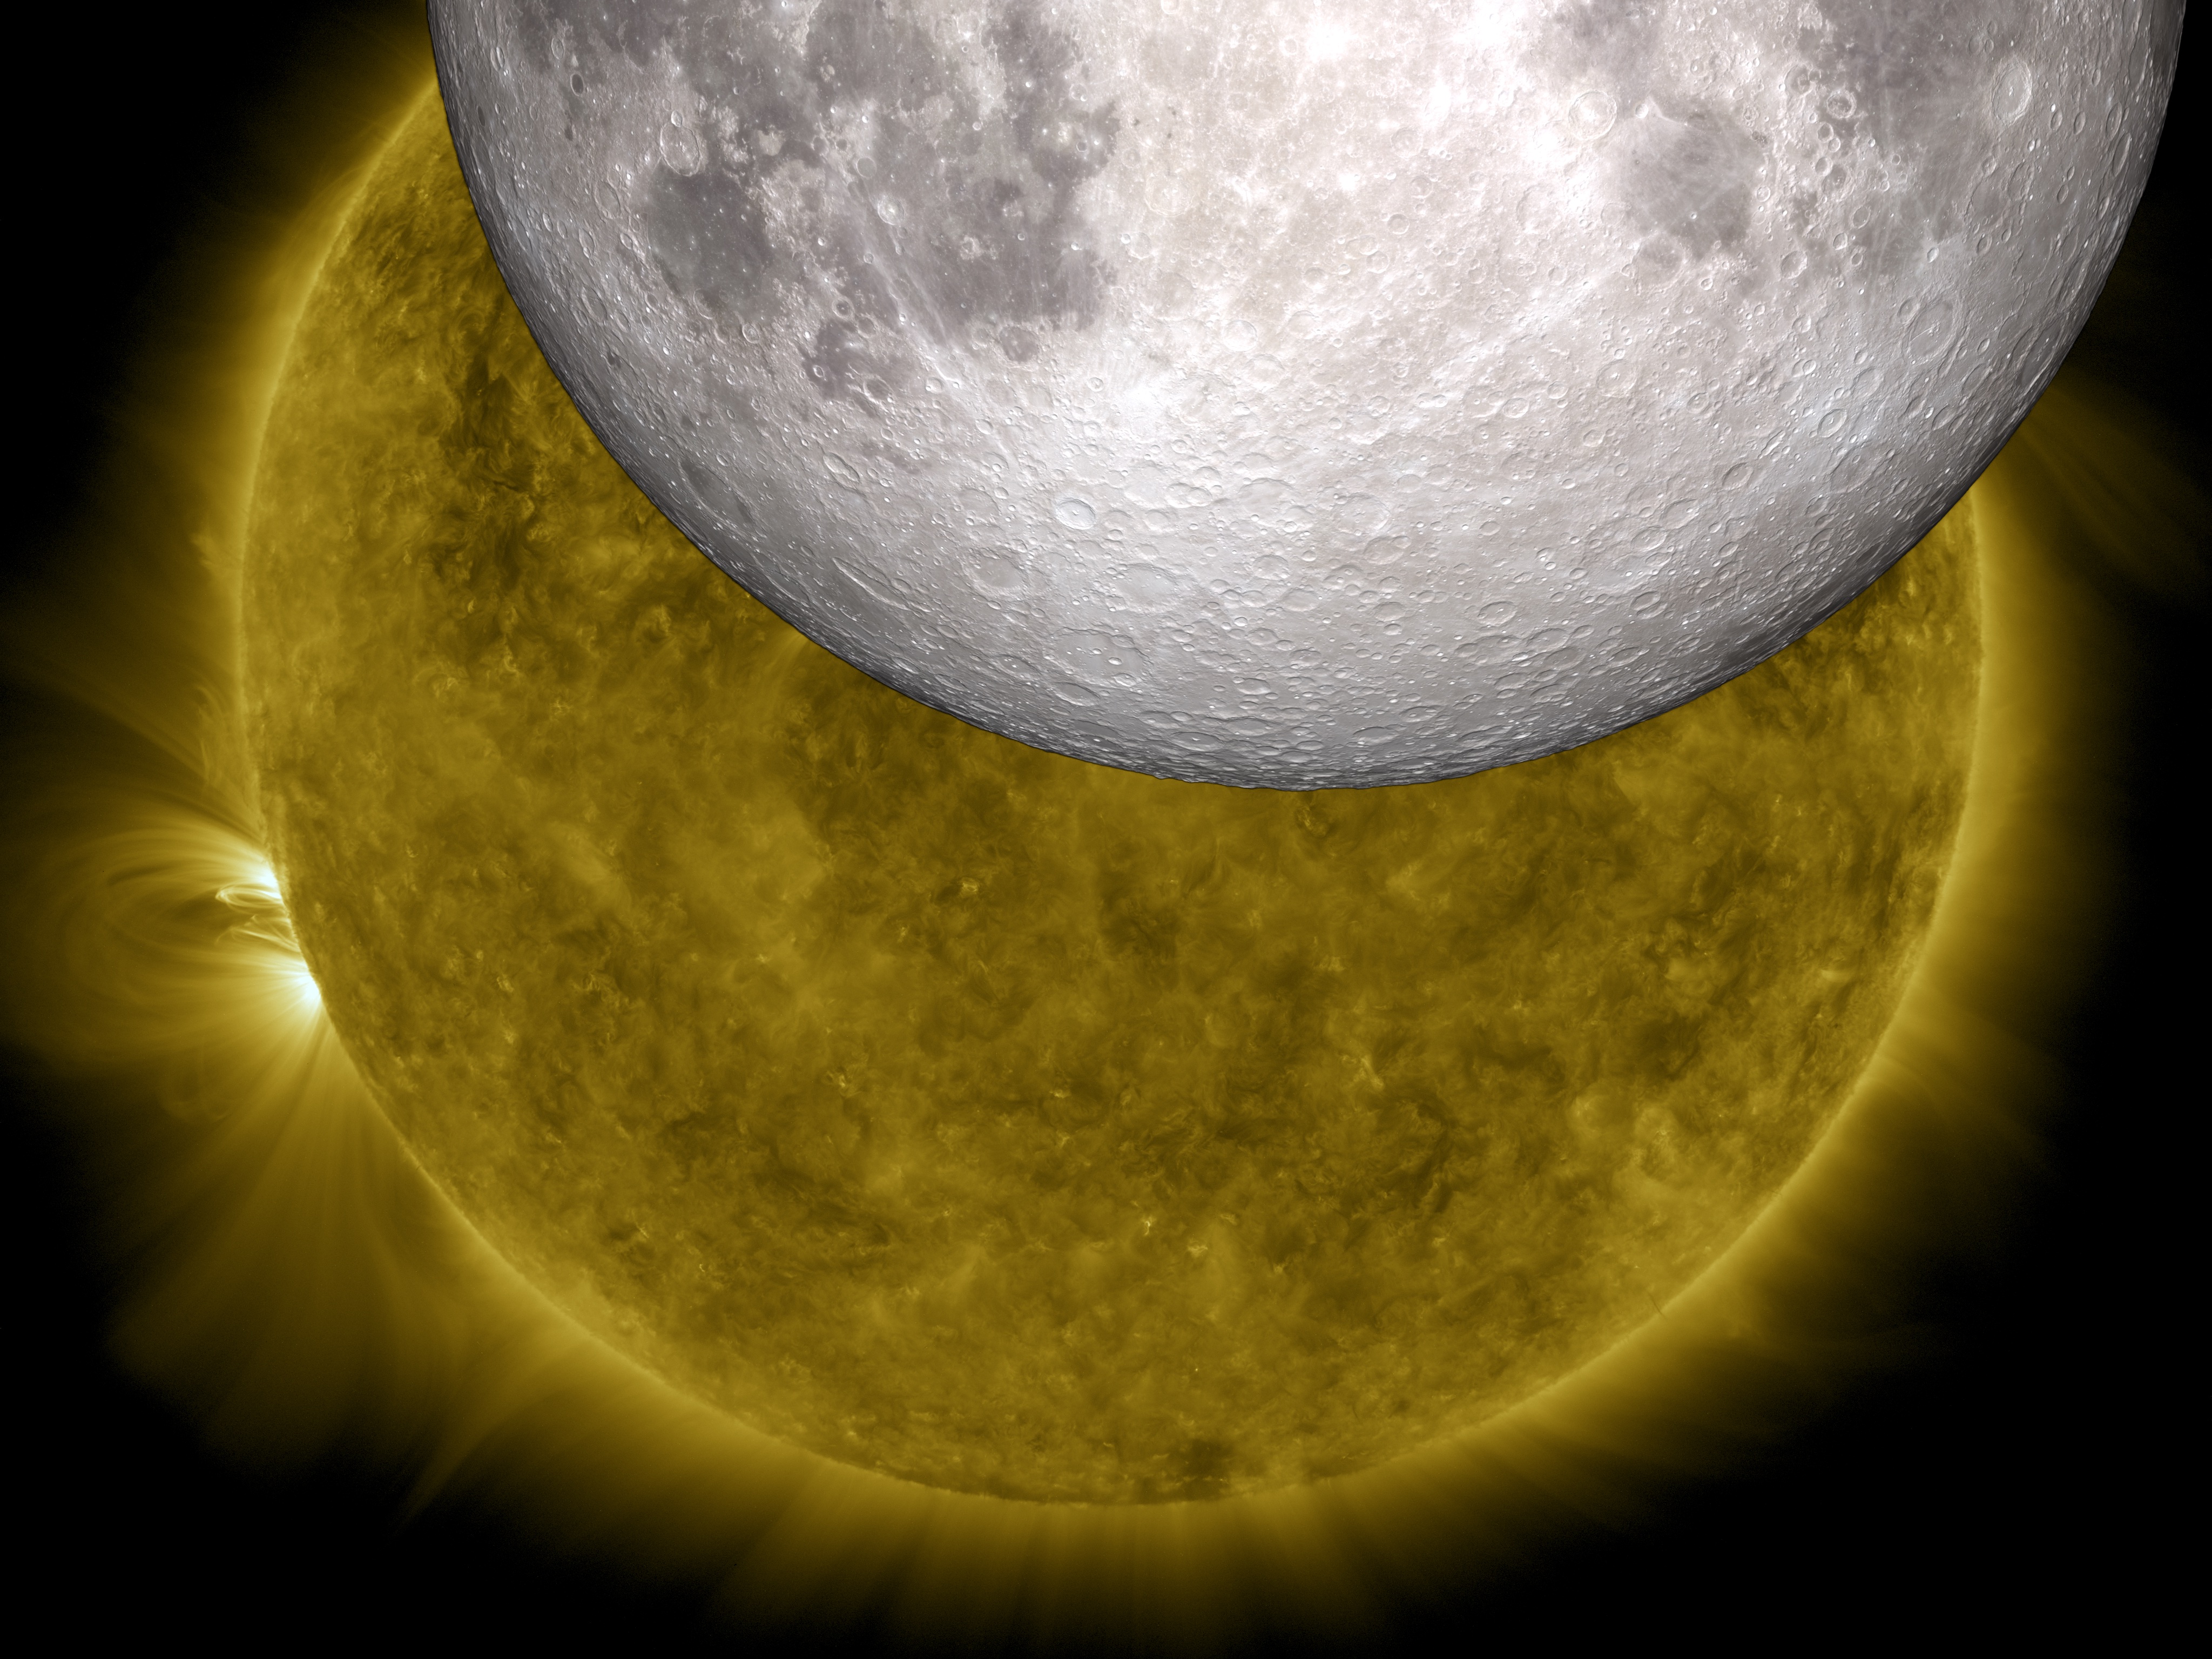 Composite image showing a detailed, fully lit Moon moving across a the Sun's swirling yellow surface.